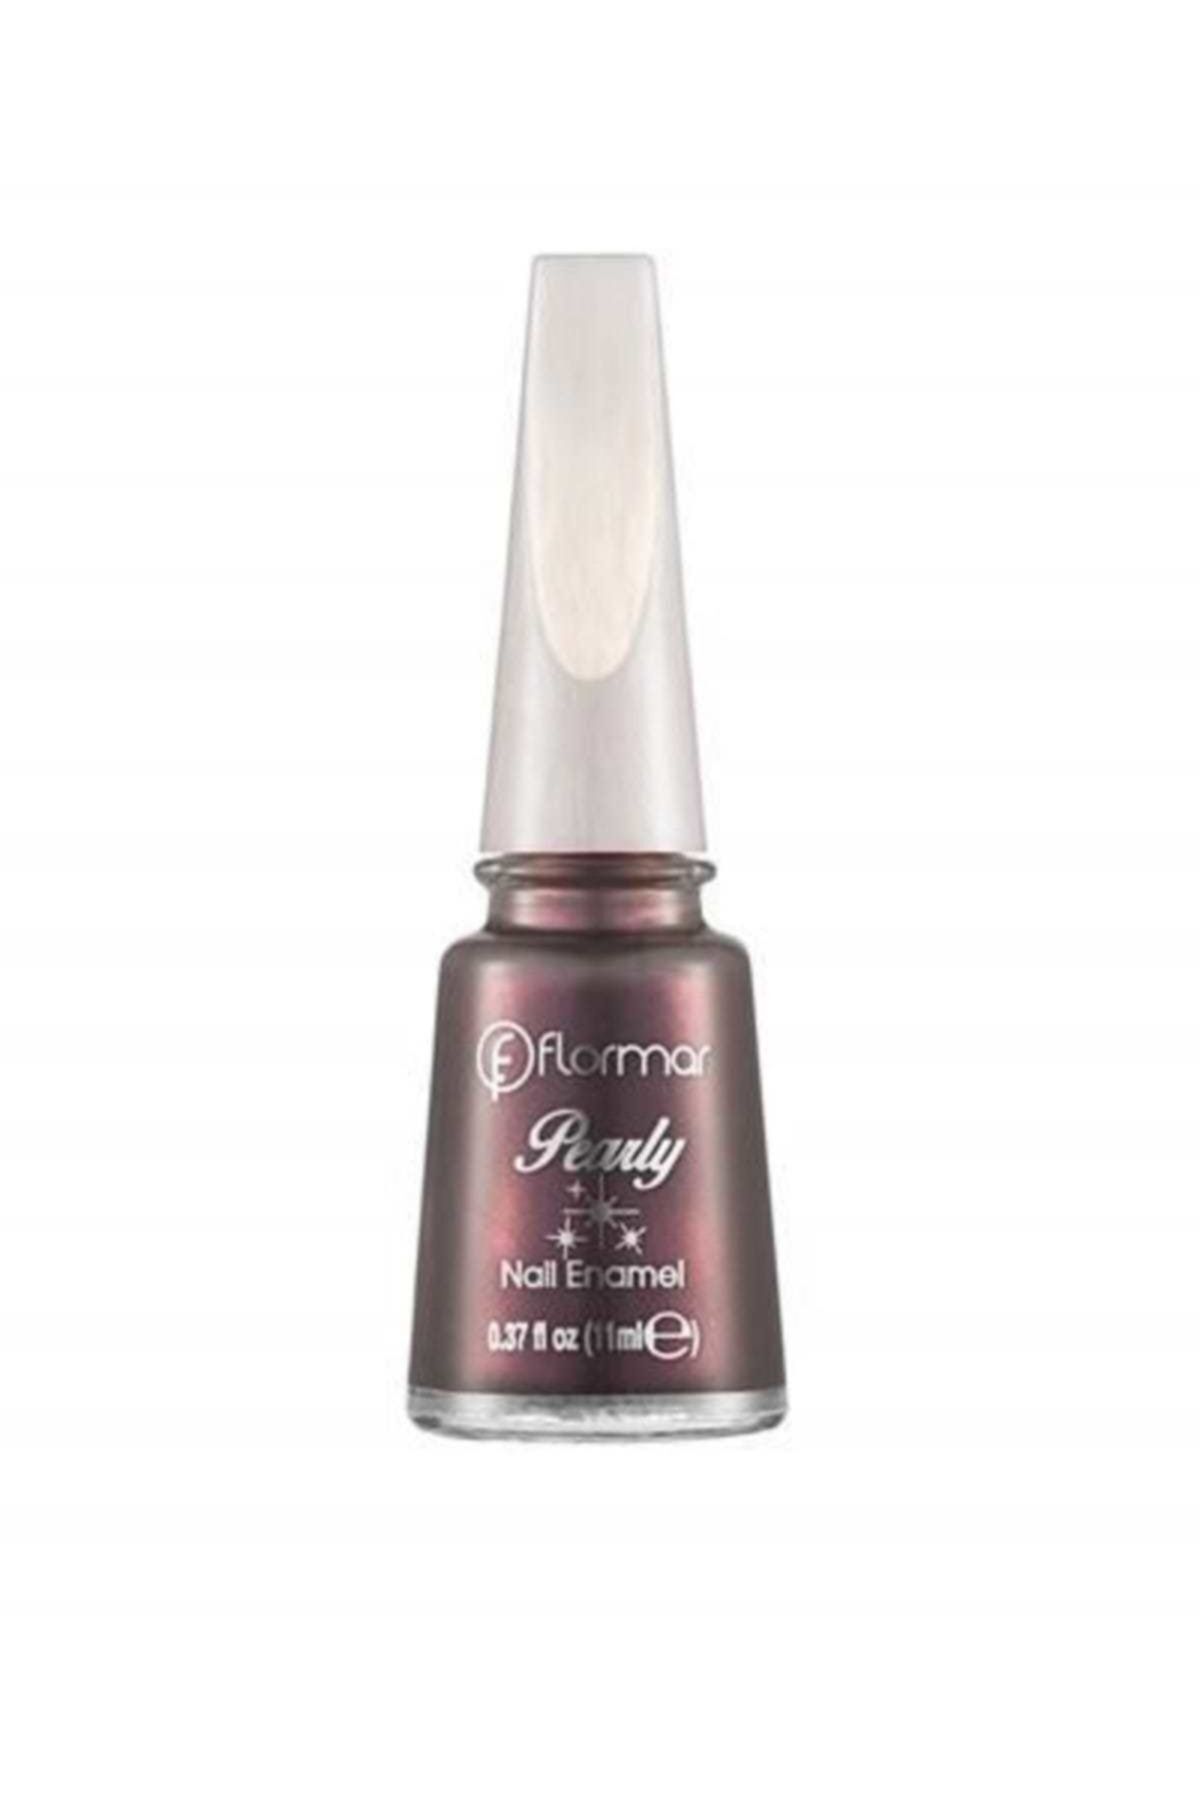 Flormar Pearly Oje - No:418 8690604280940